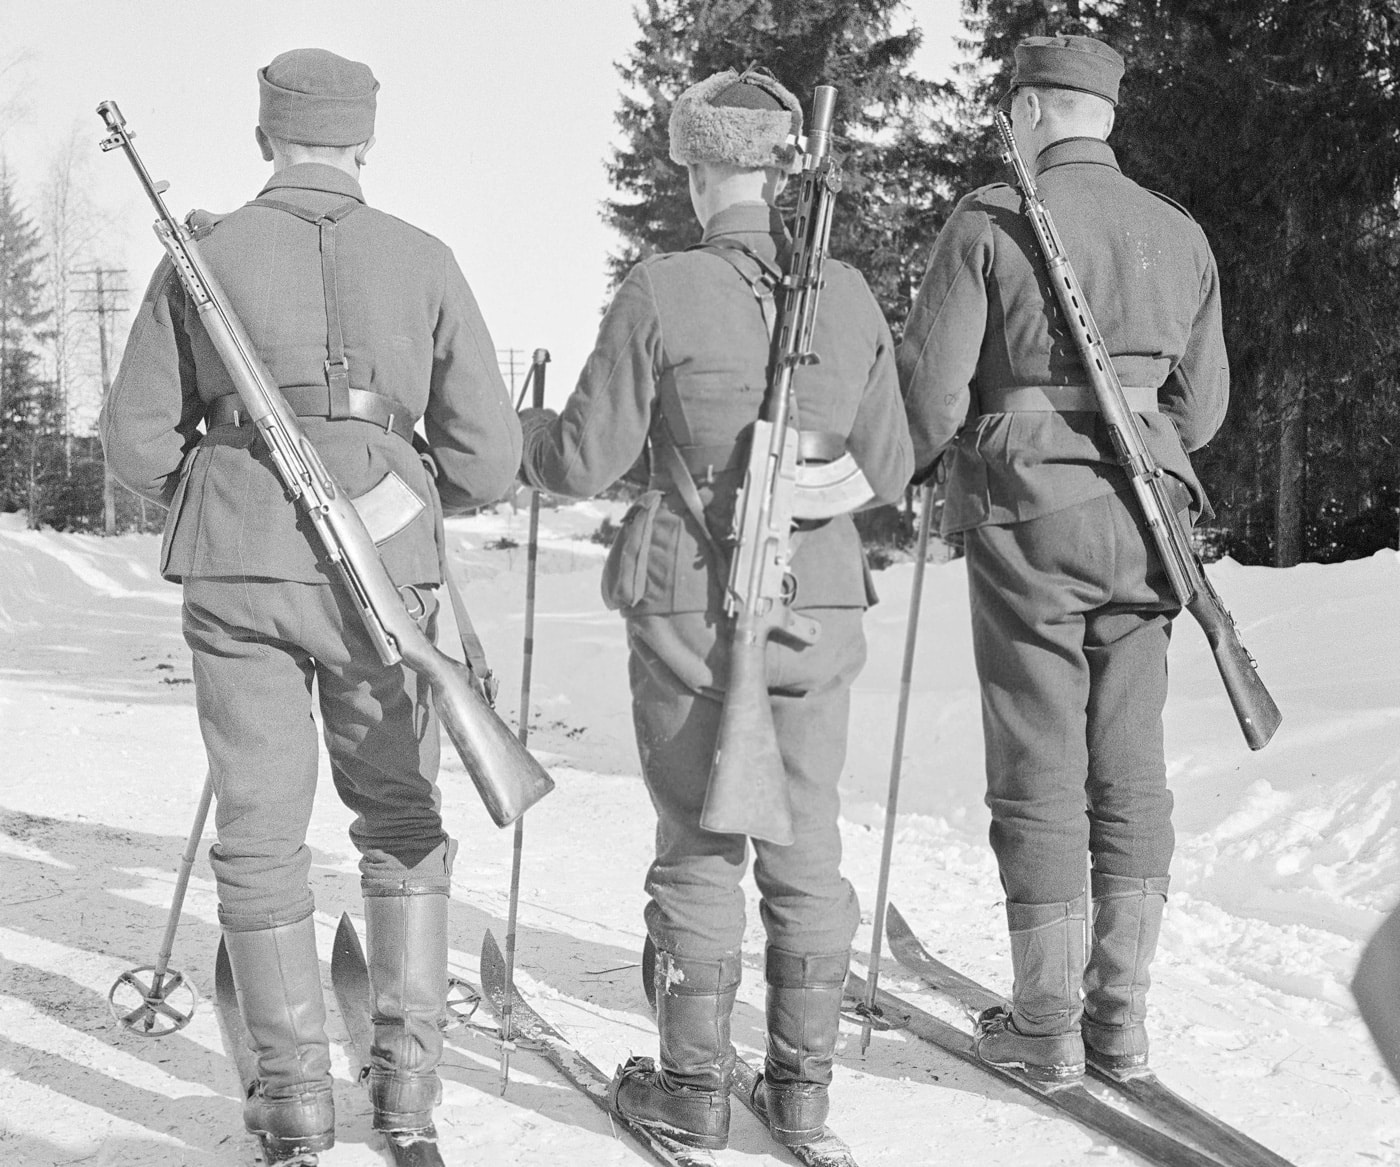 Shown in this image is a Finnish ski patrol with Lahti-Saloranta M26 in the Continuation War against the Soviet Union. 	Aimo Johannes Lahti was a self-taught Finnish weapons designer. Of the 50 weapons he designed, the best known is the Suomi KP/-31 SMG.